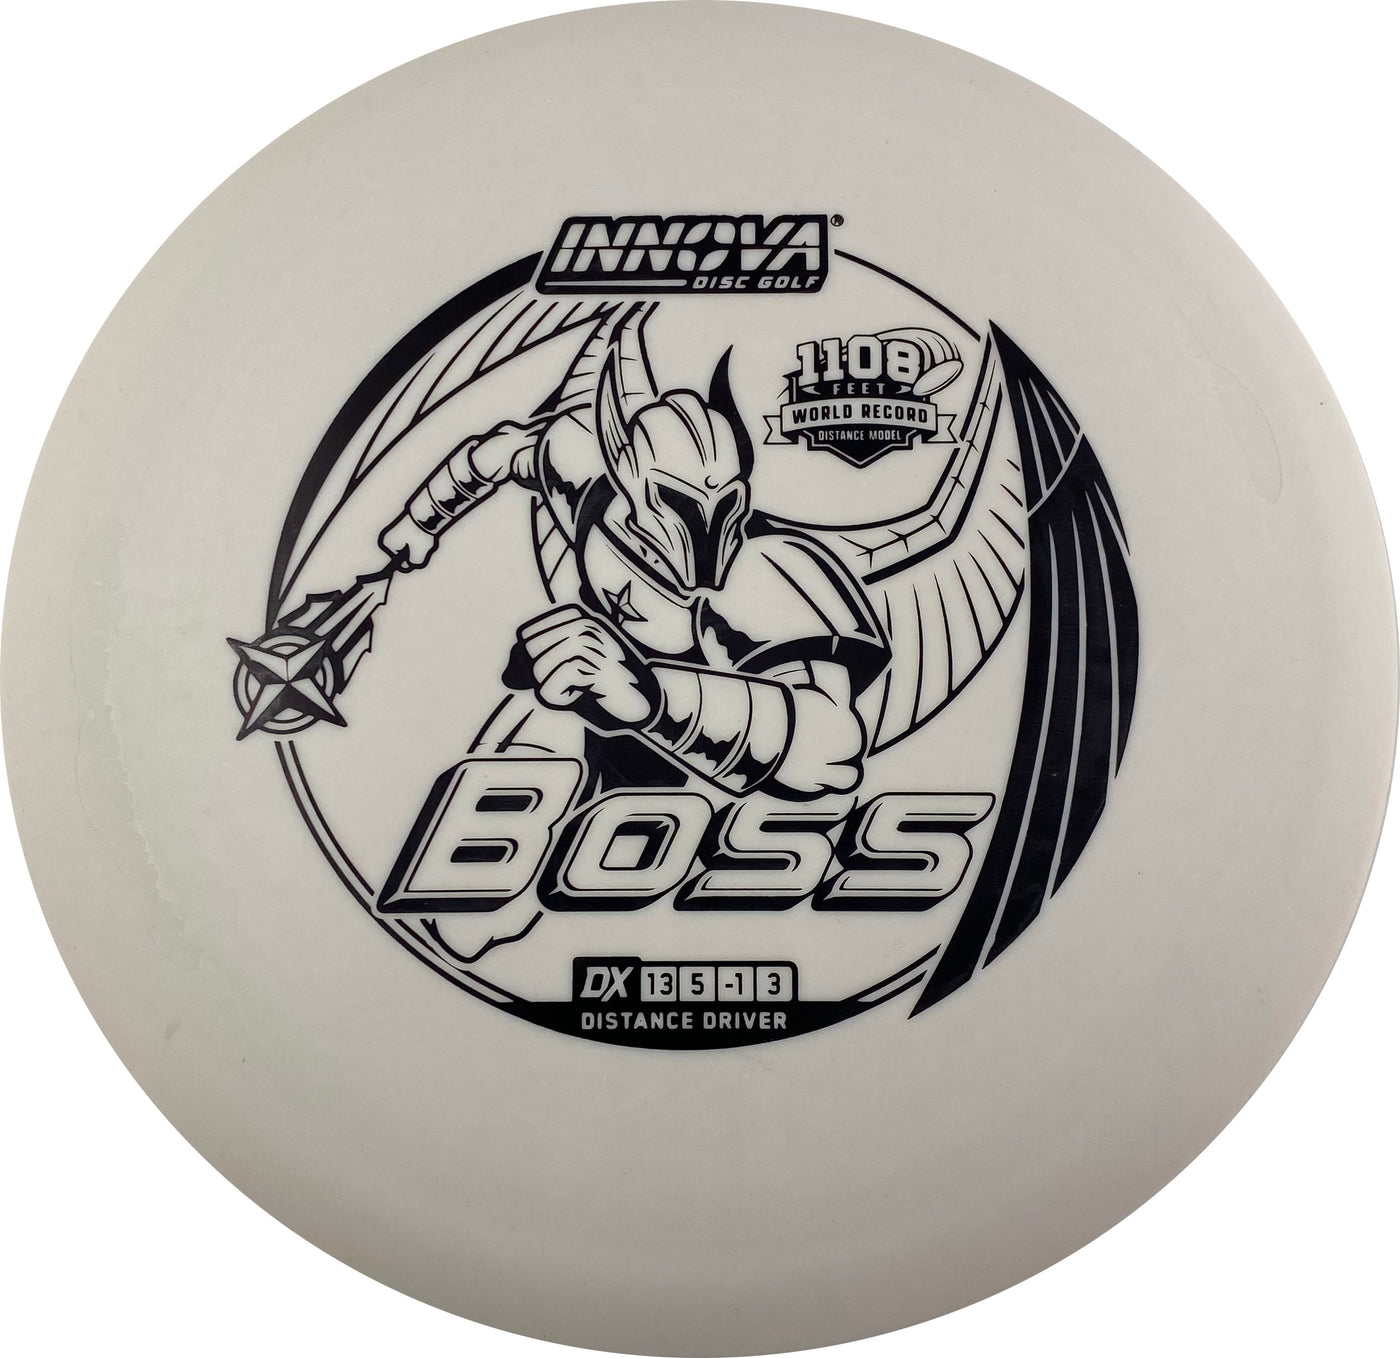 Innova DX Boss Distance Driver with 1108 Feet World Record Distance Model Stamp - Speed 13